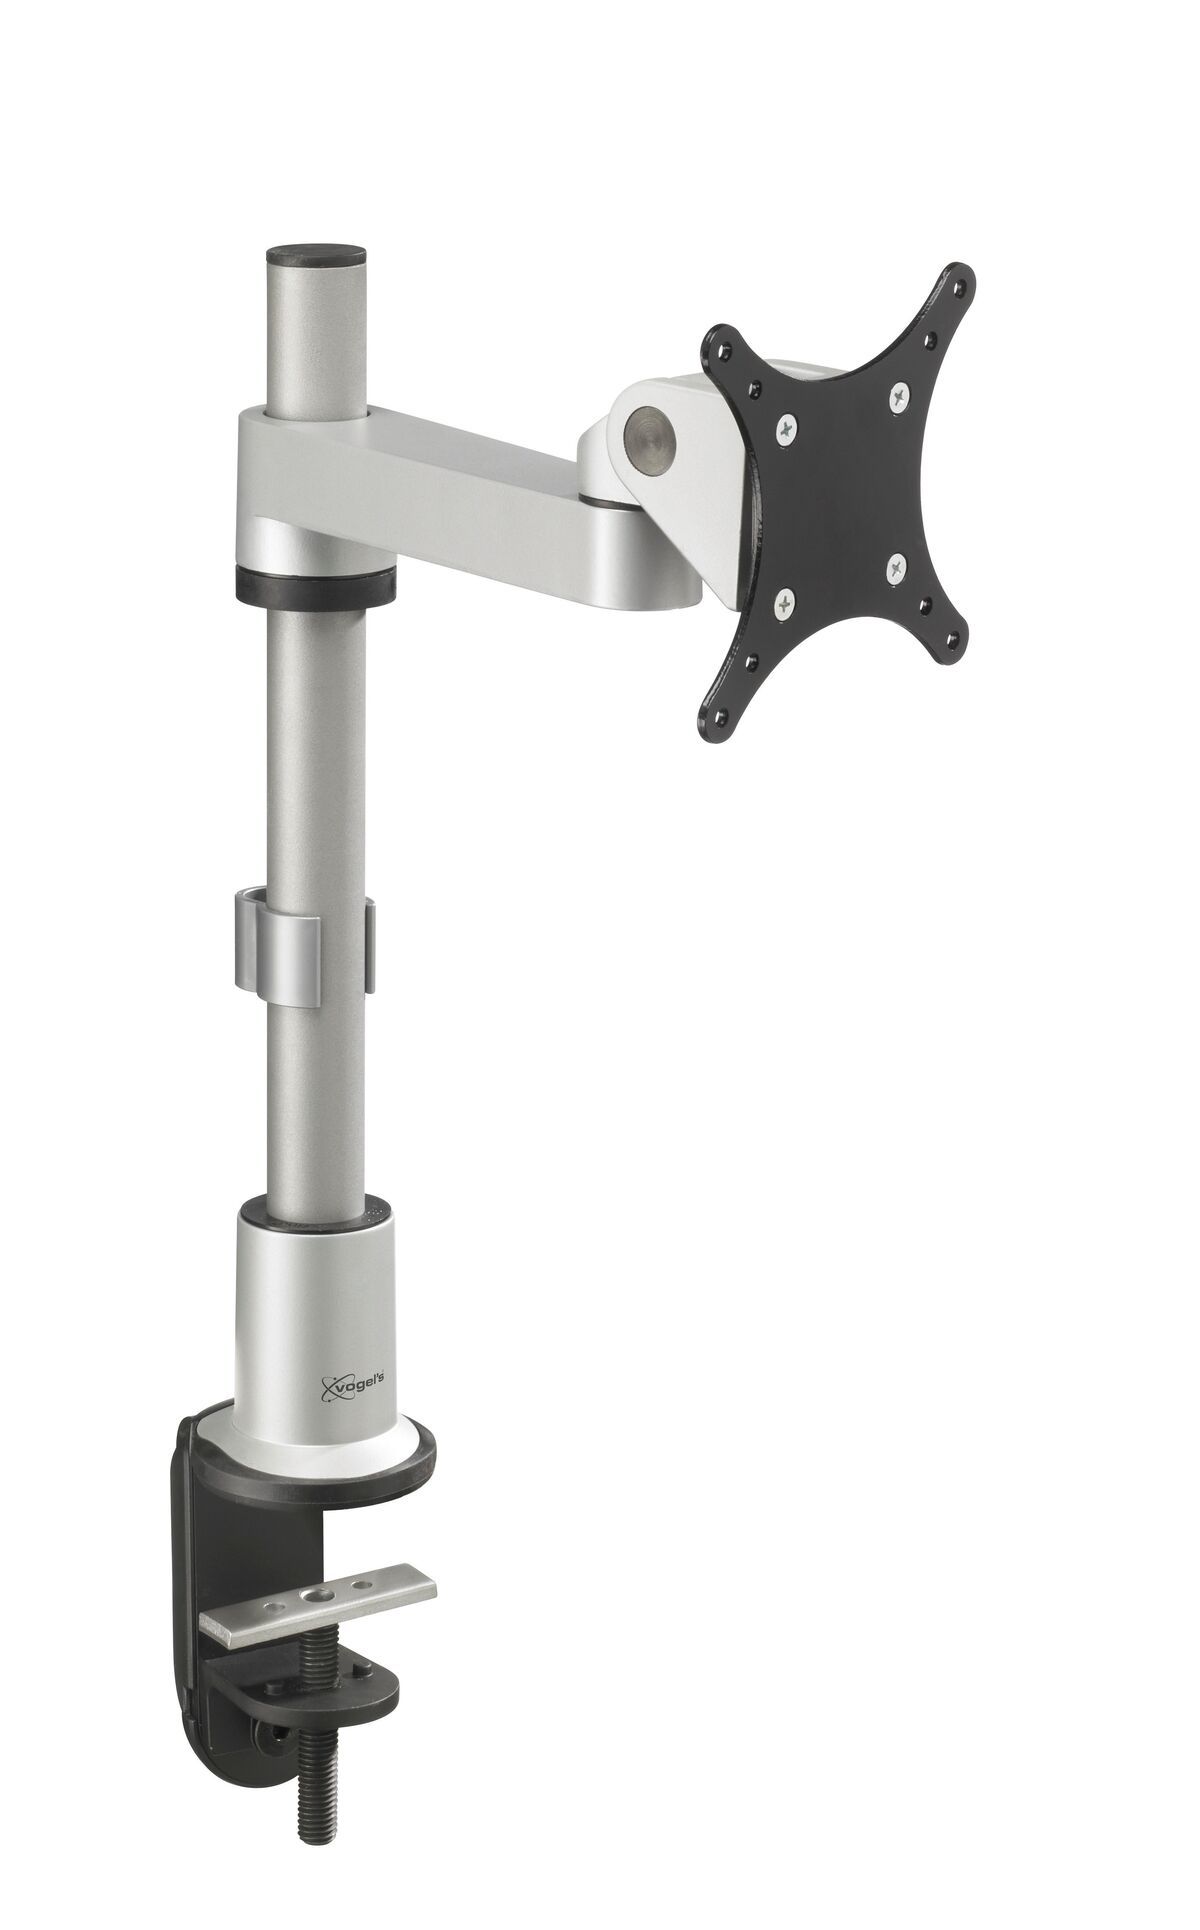 Vogel's PFD 8522 Monitor Arm static (silver) - For monitors up to Product